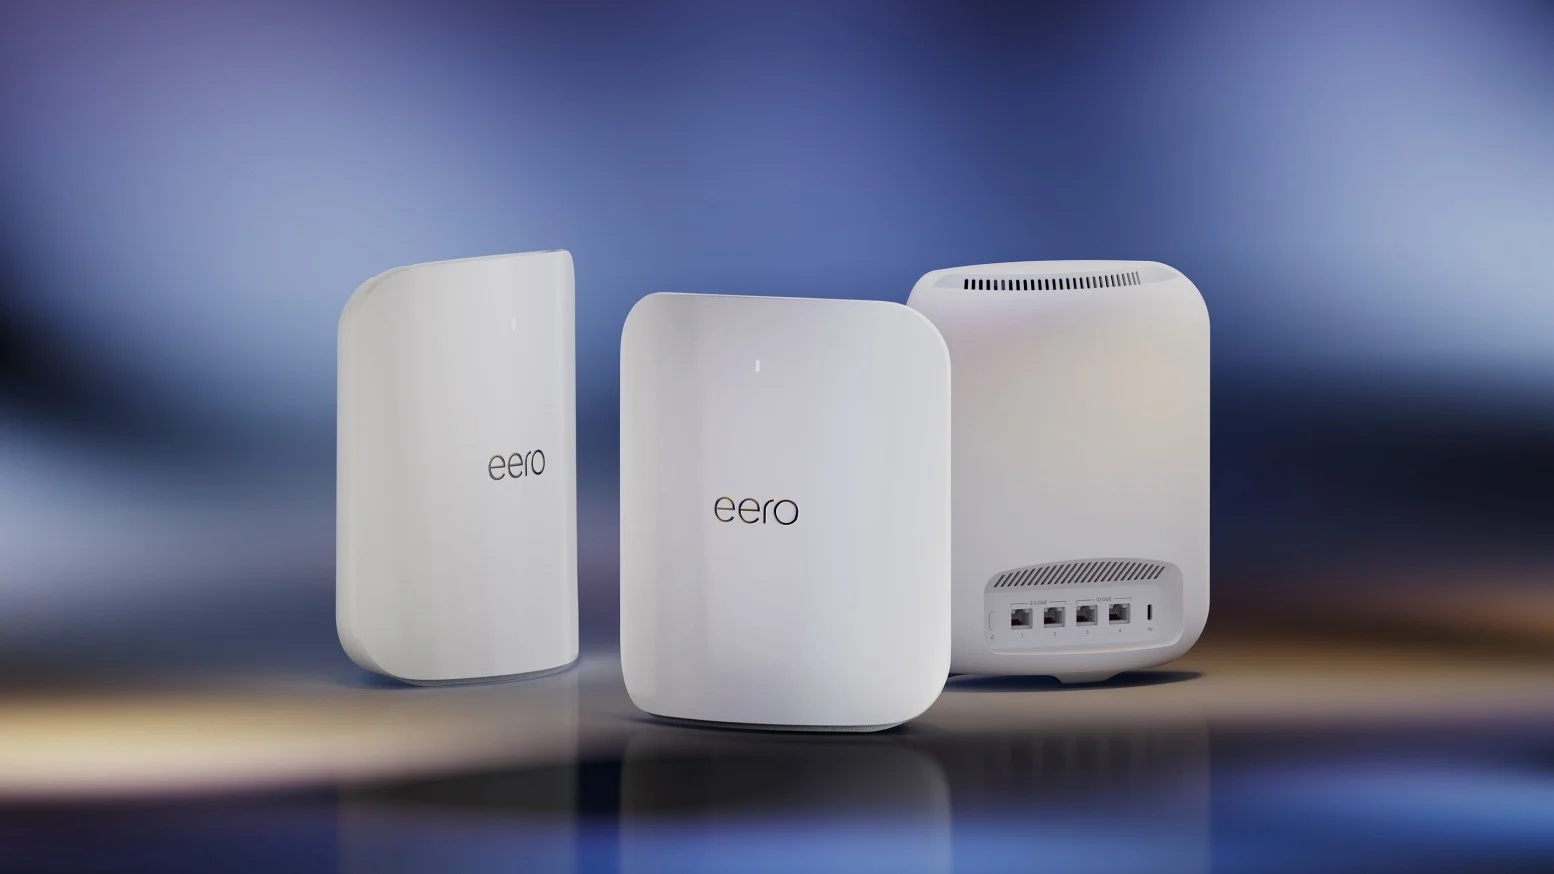 Eero Wi-Fi Mesh Router Can Improve Your Home Network